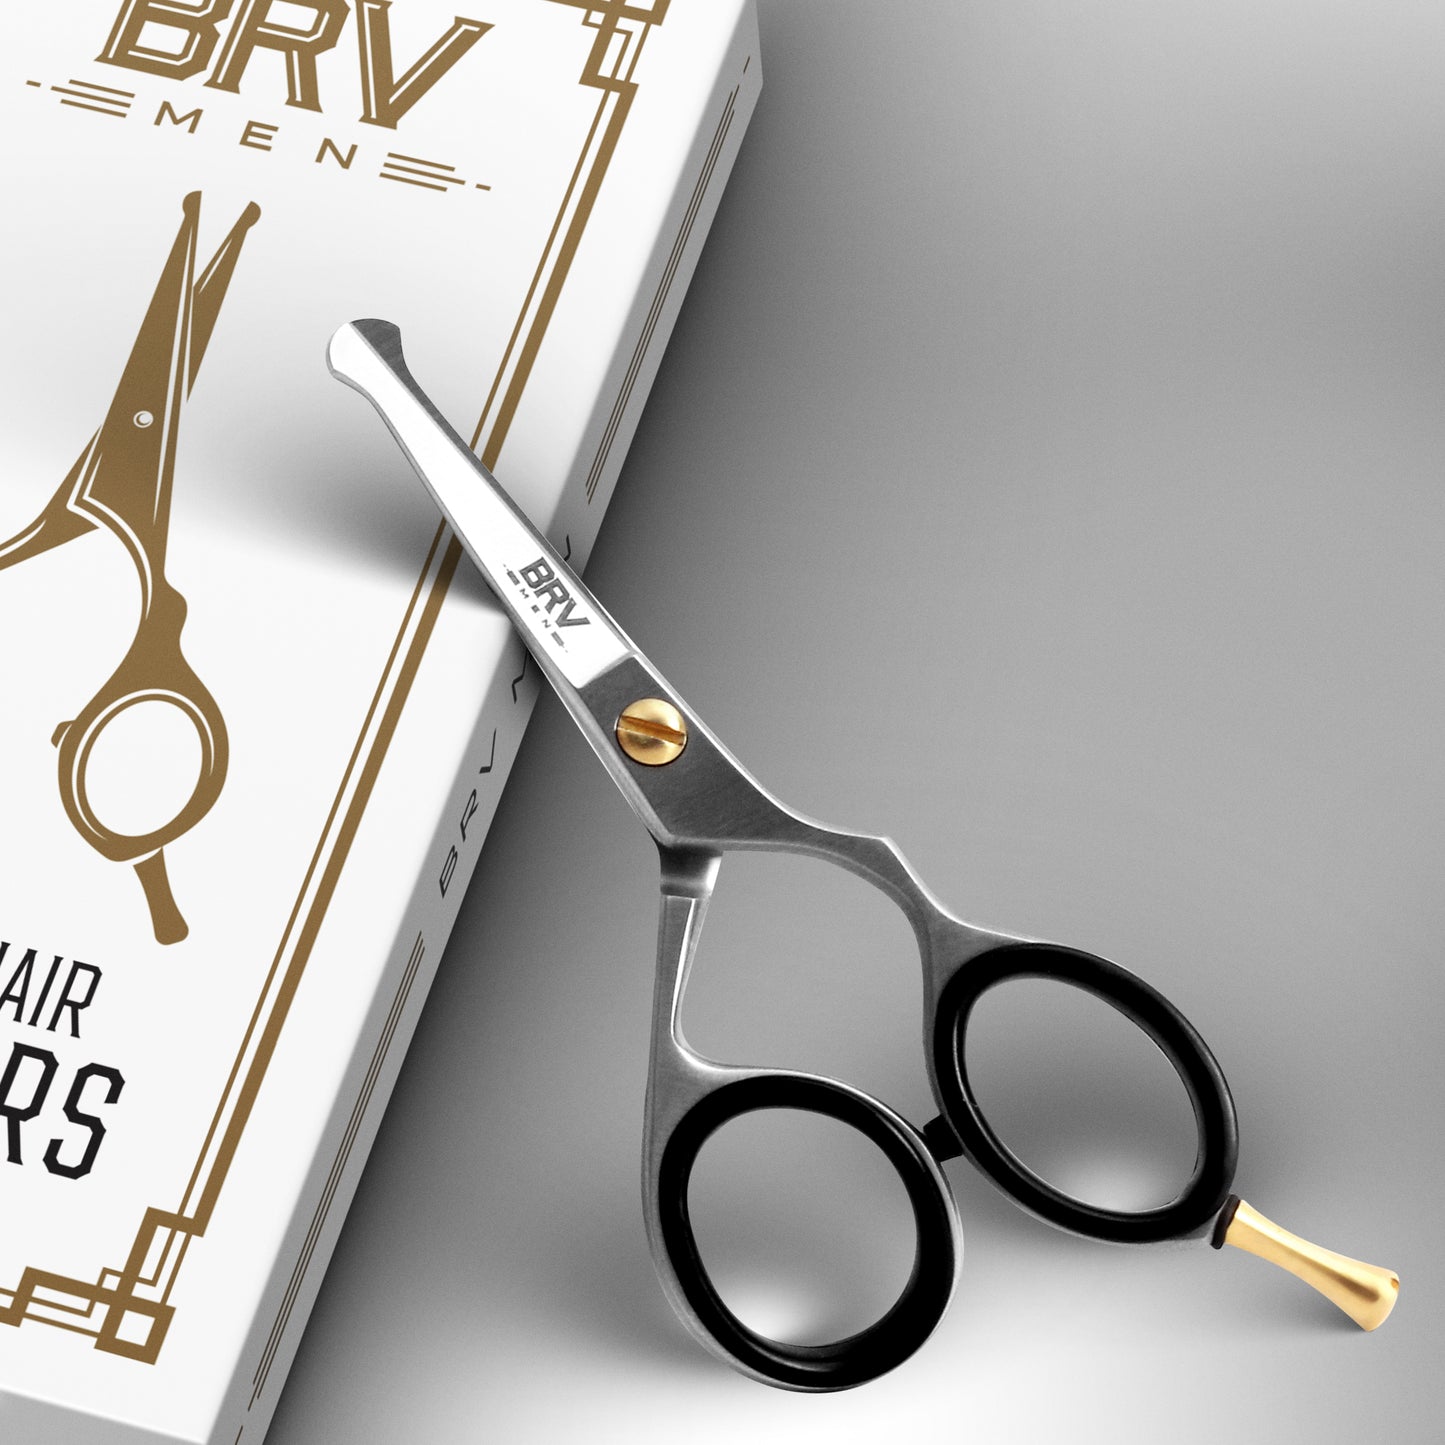 
                  
                    BRV MEN Rounded-Tip Scissors, 4.2" - Hammer Forged 100% Stainless Steel - Beard, Mustache, Nose Hair, Ear Hair Trimming - Professional Grooming Scissors - 4.2" (Silver)
                  
                